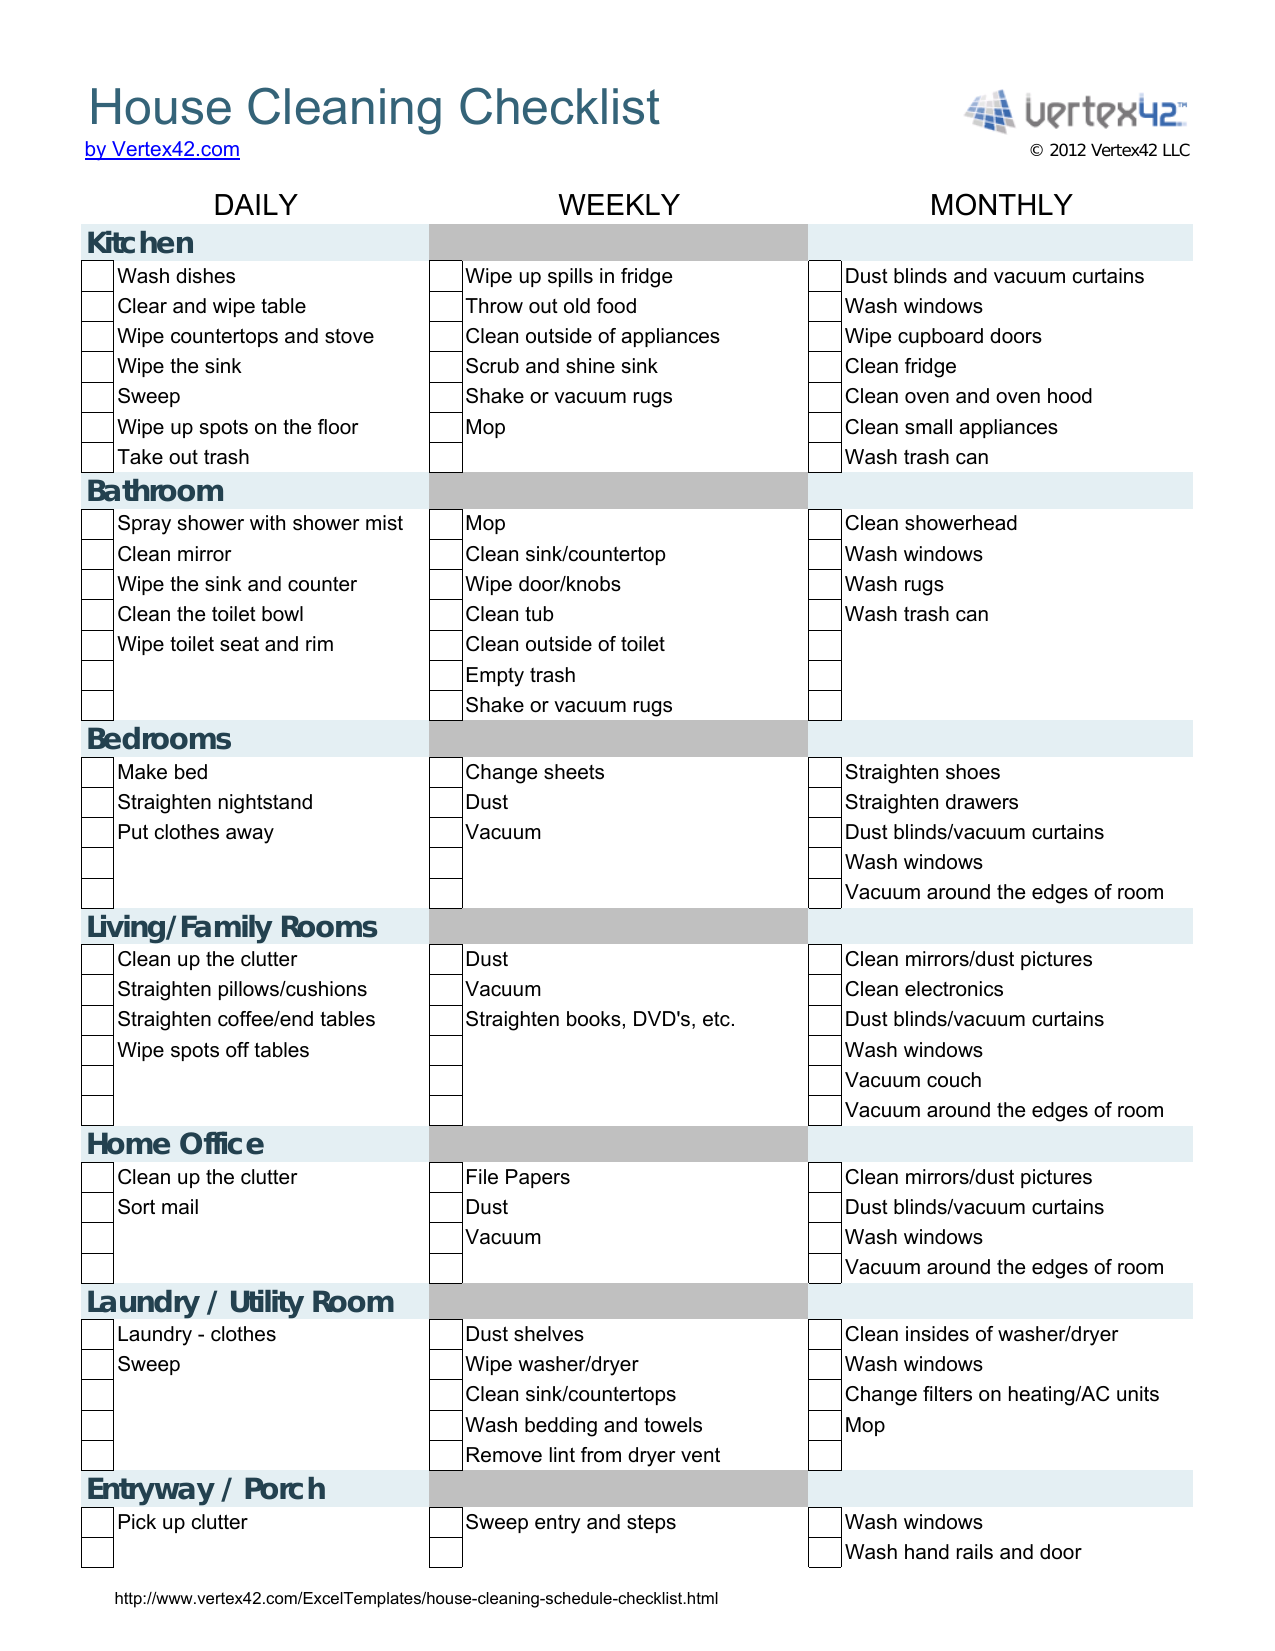 Download House Cleaning Checklist Template  Excel  PDF  RTF  Inside Deep Cleaning Checklist Template Throughout Deep Cleaning Checklist Template